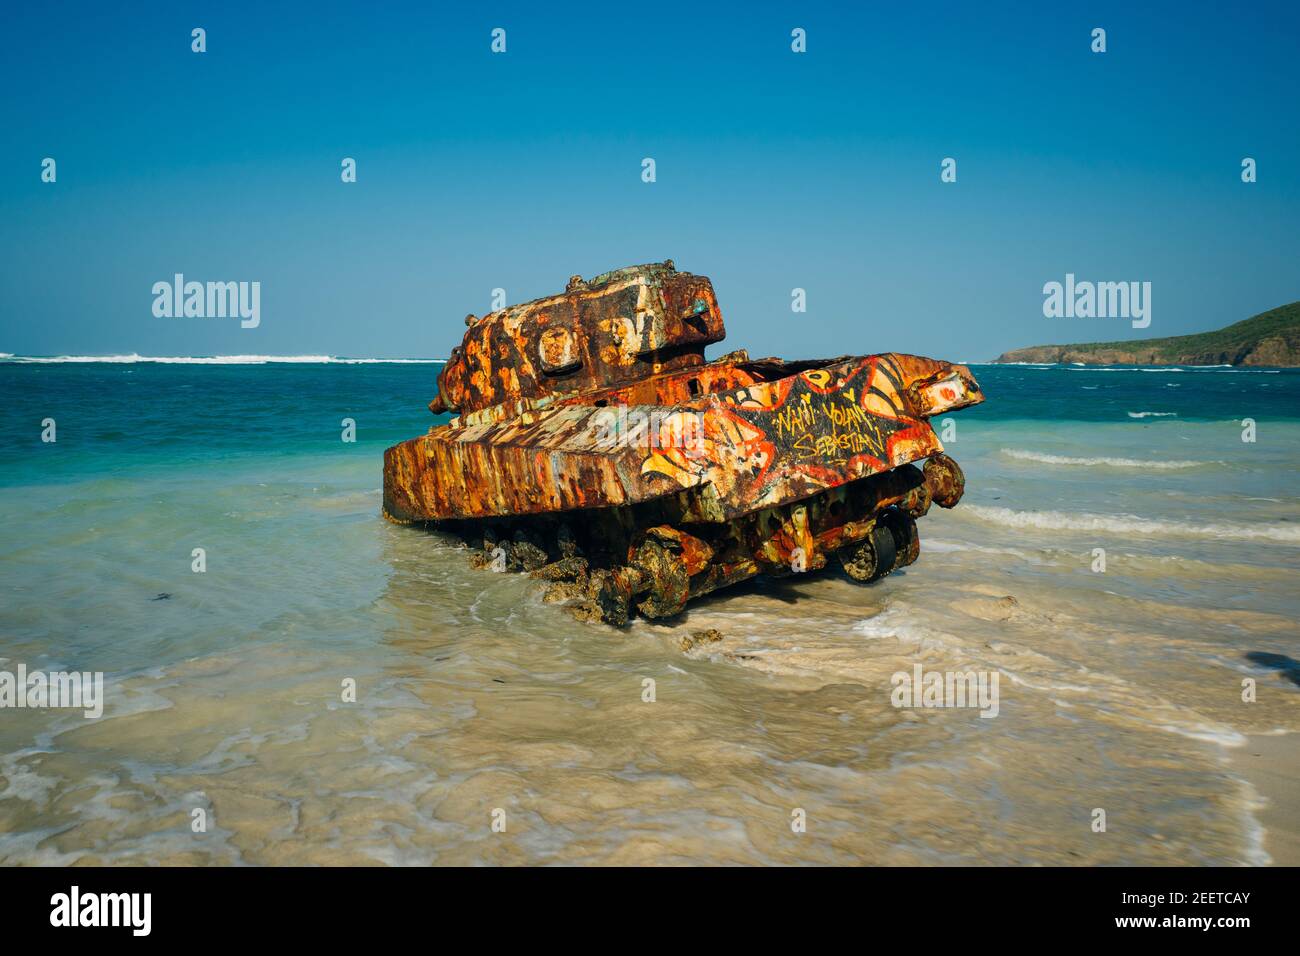 The old rusted and deserted military tank of Flamenco beach on the Puerto Rico island of Culebra Stock Photo